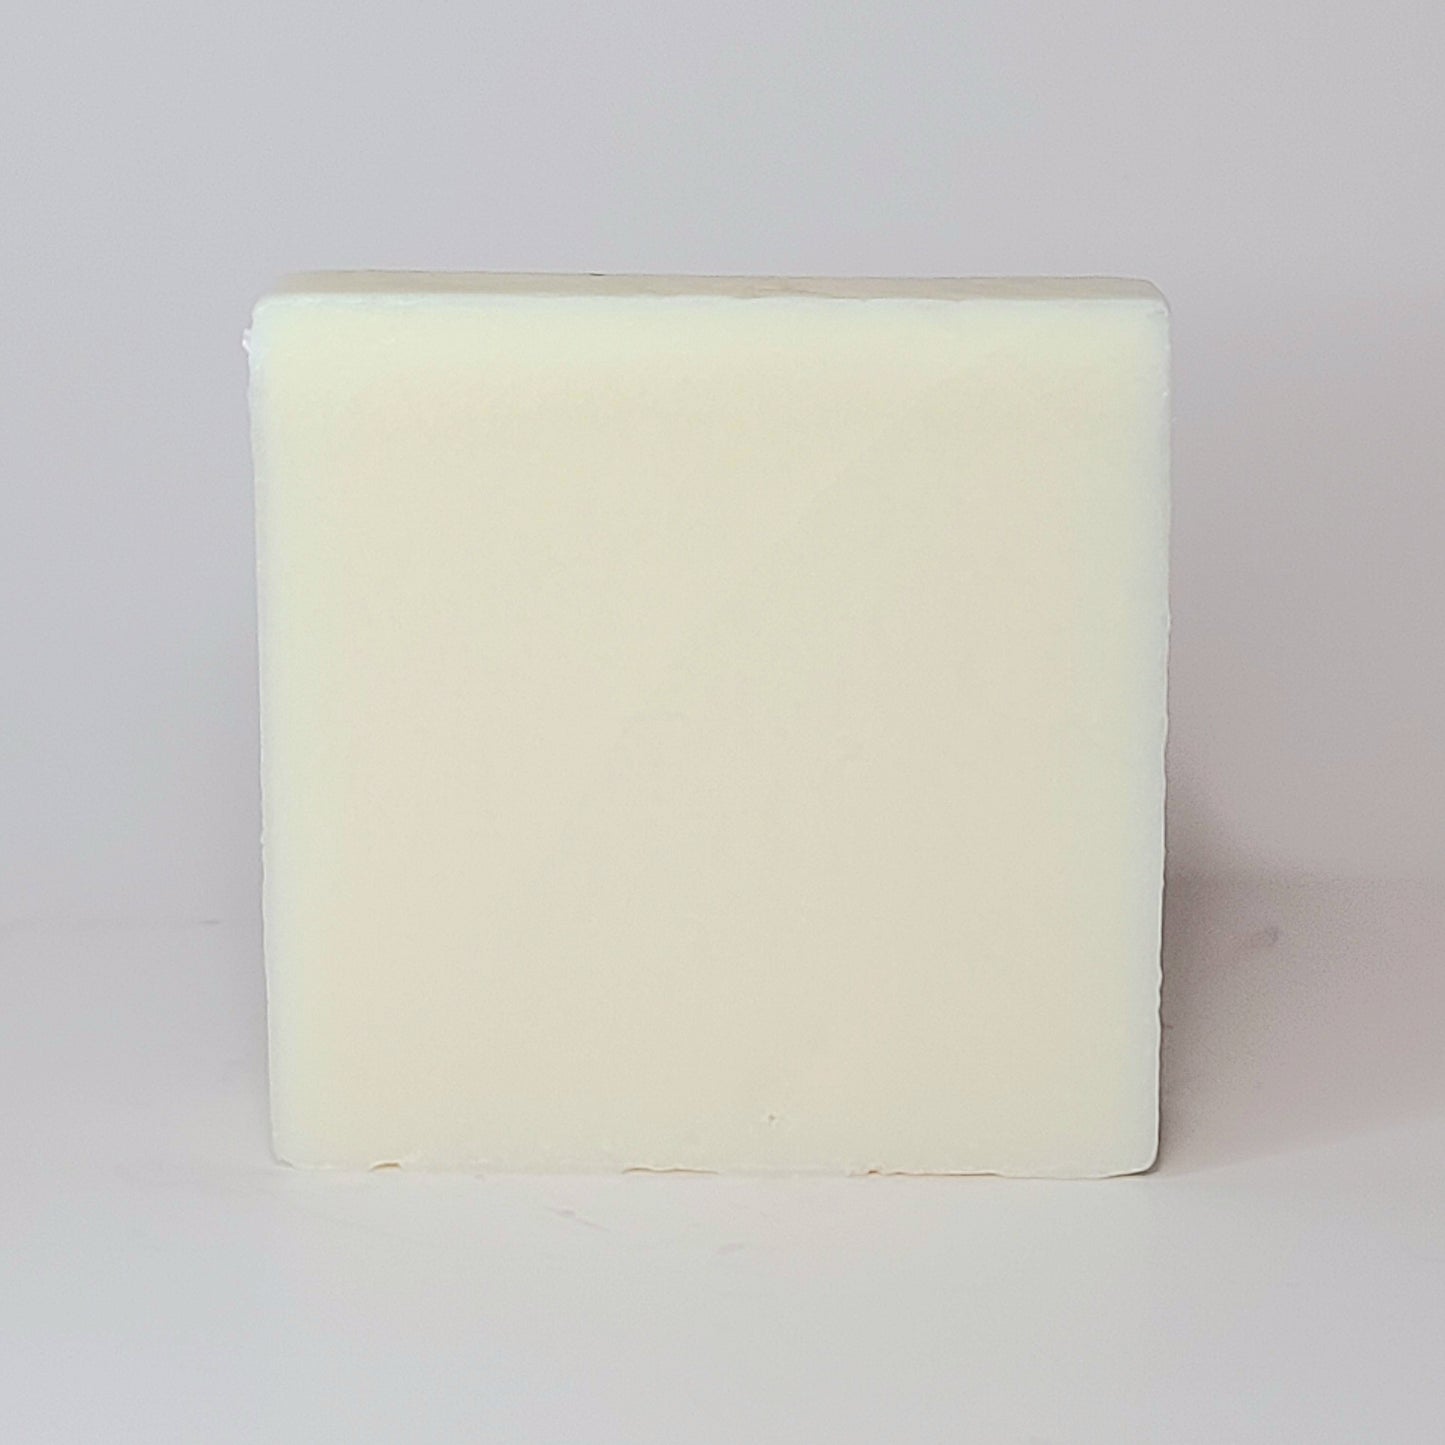 Scentless Soap